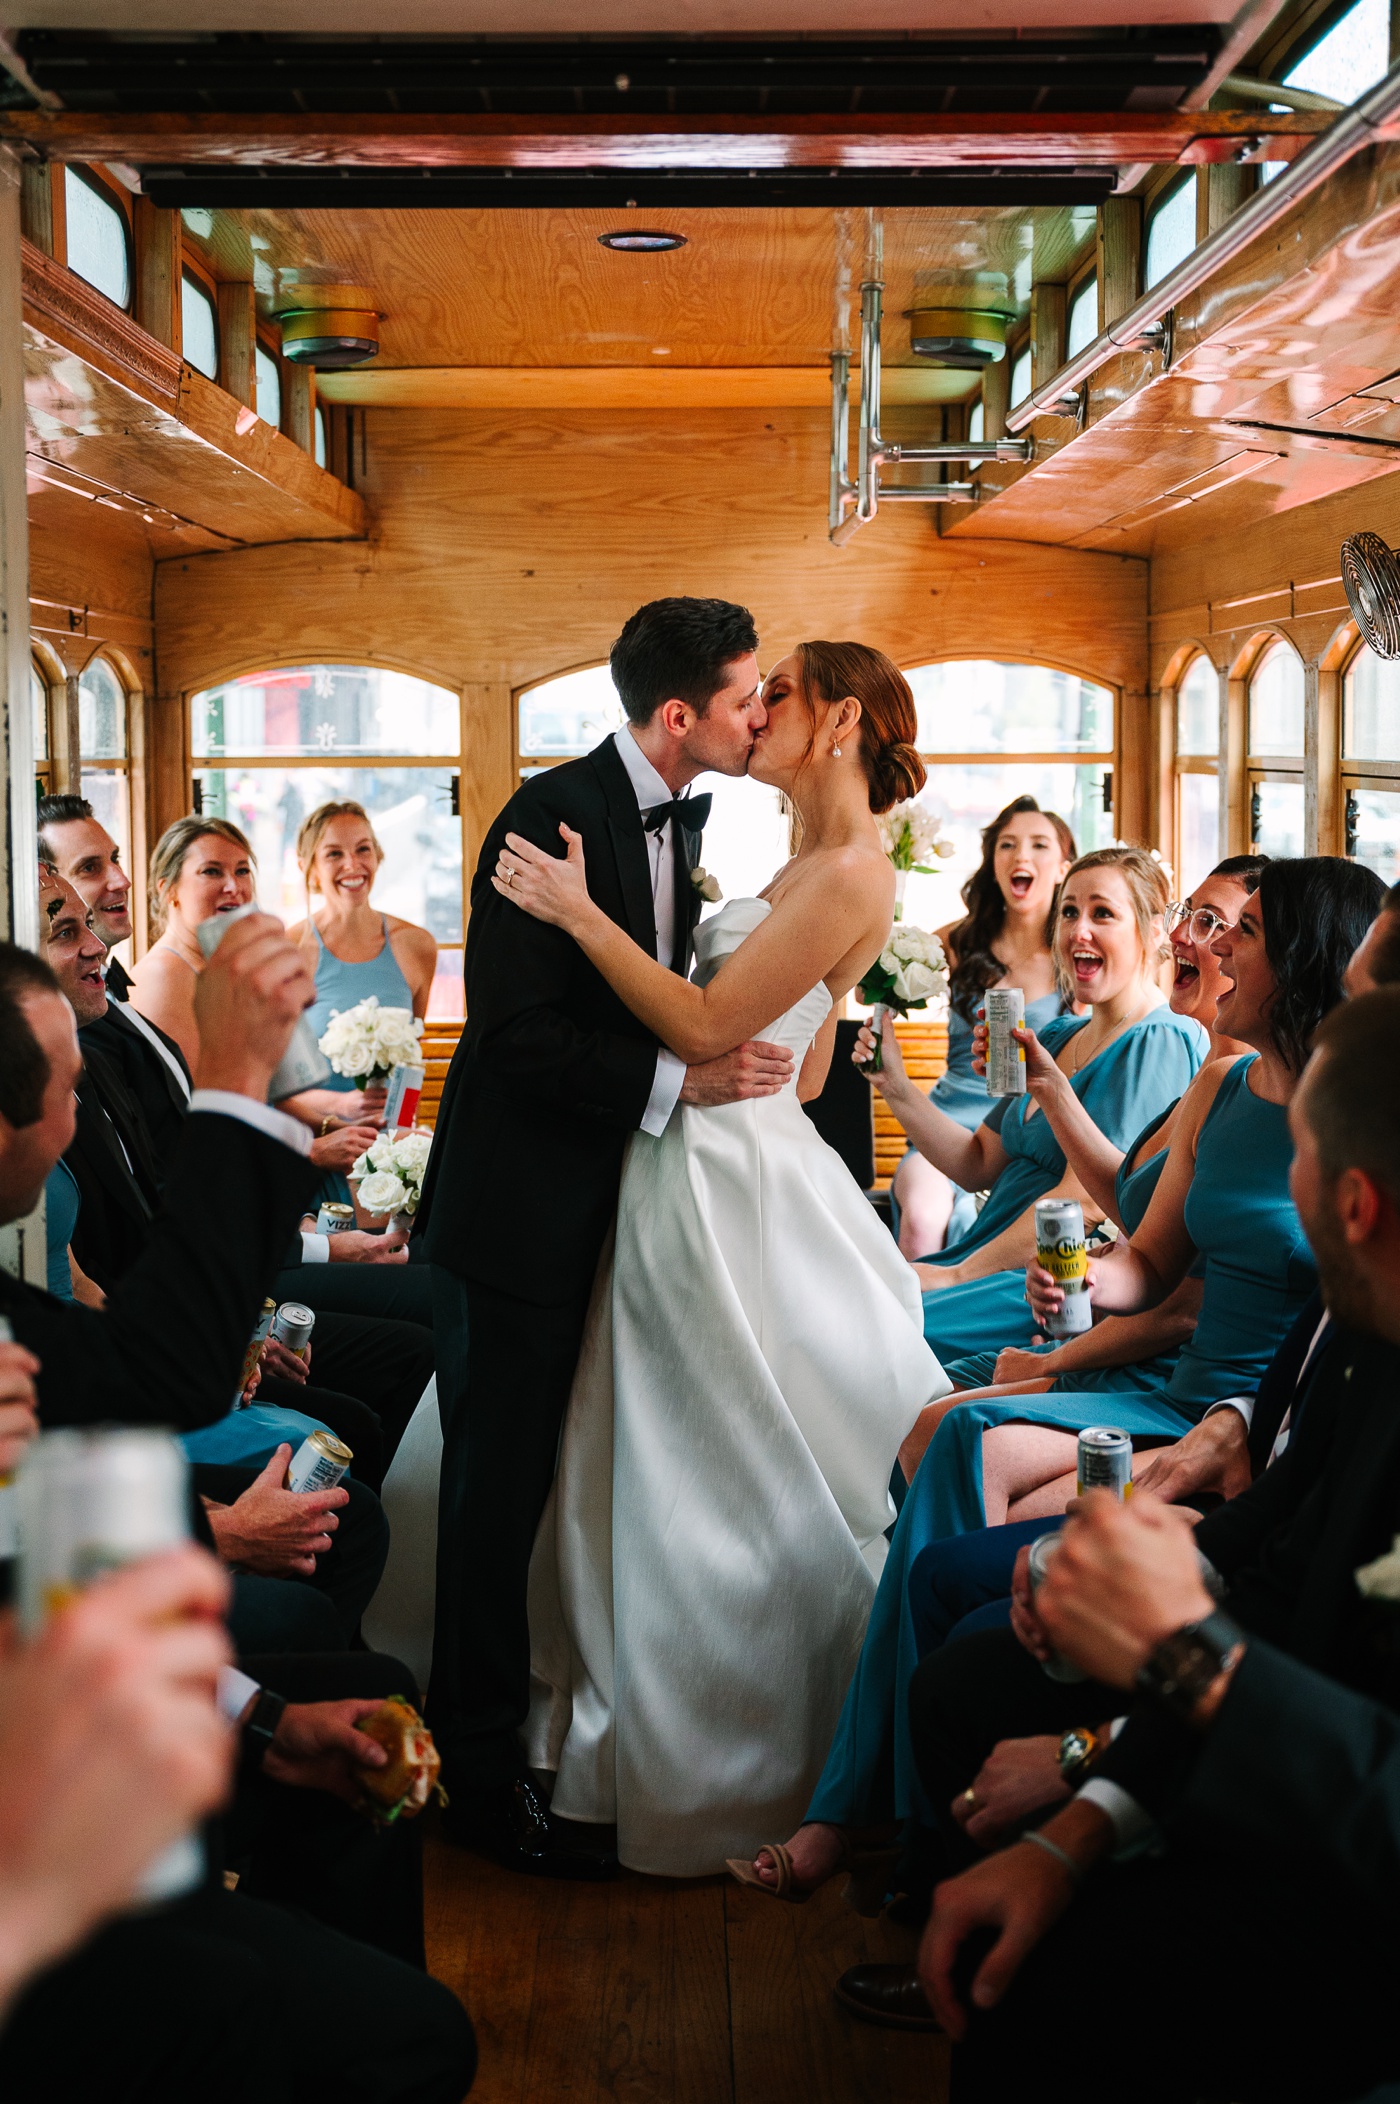 Bridal party on a vintage trolley for a downtown Chicago wedding